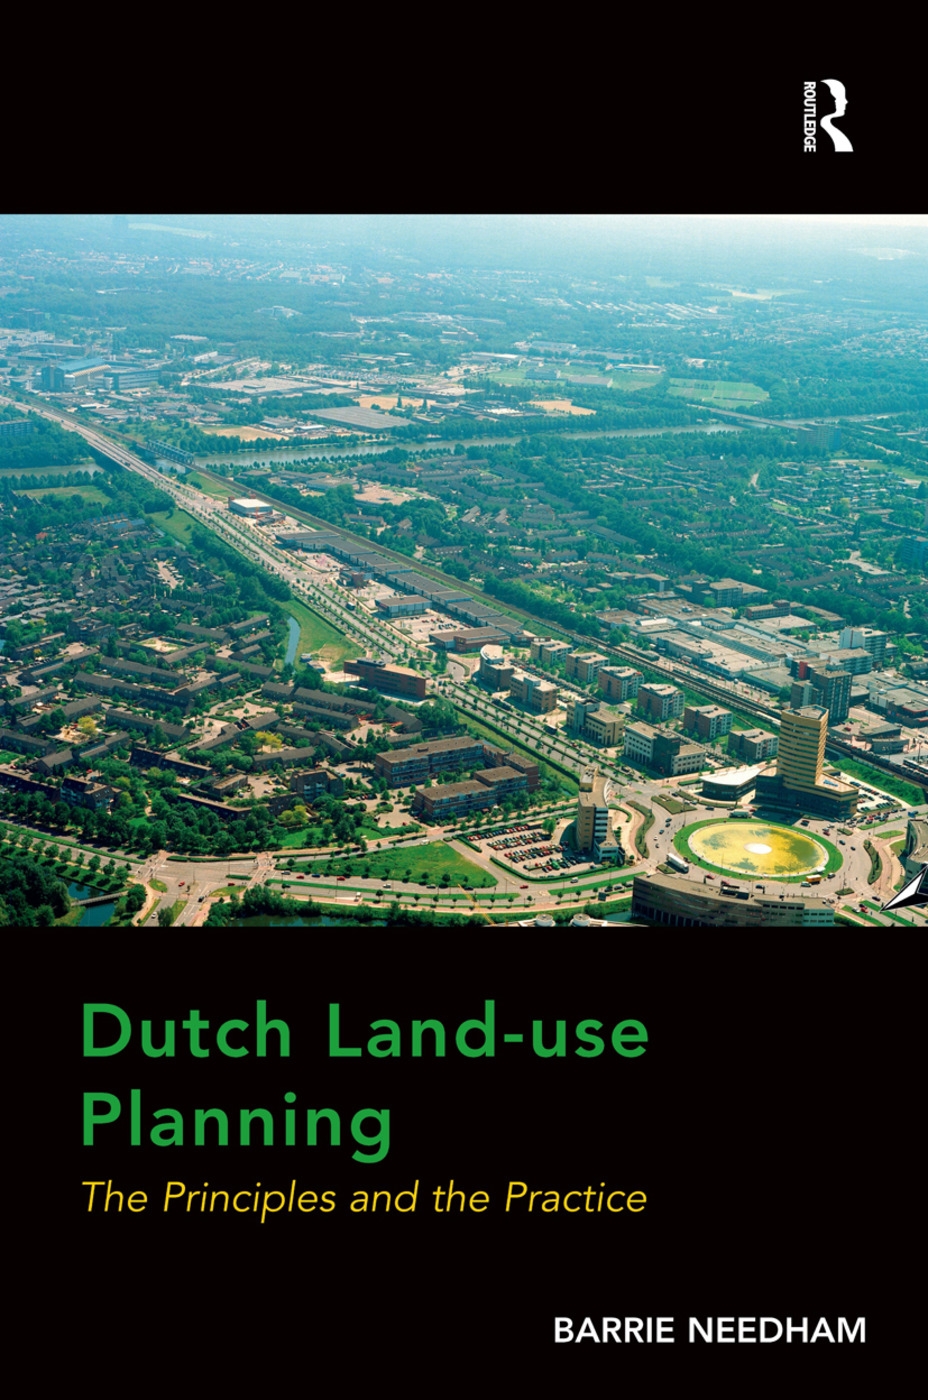 Dutch Land-Use Planning: The Principles and the Practice. by Barrie Needham